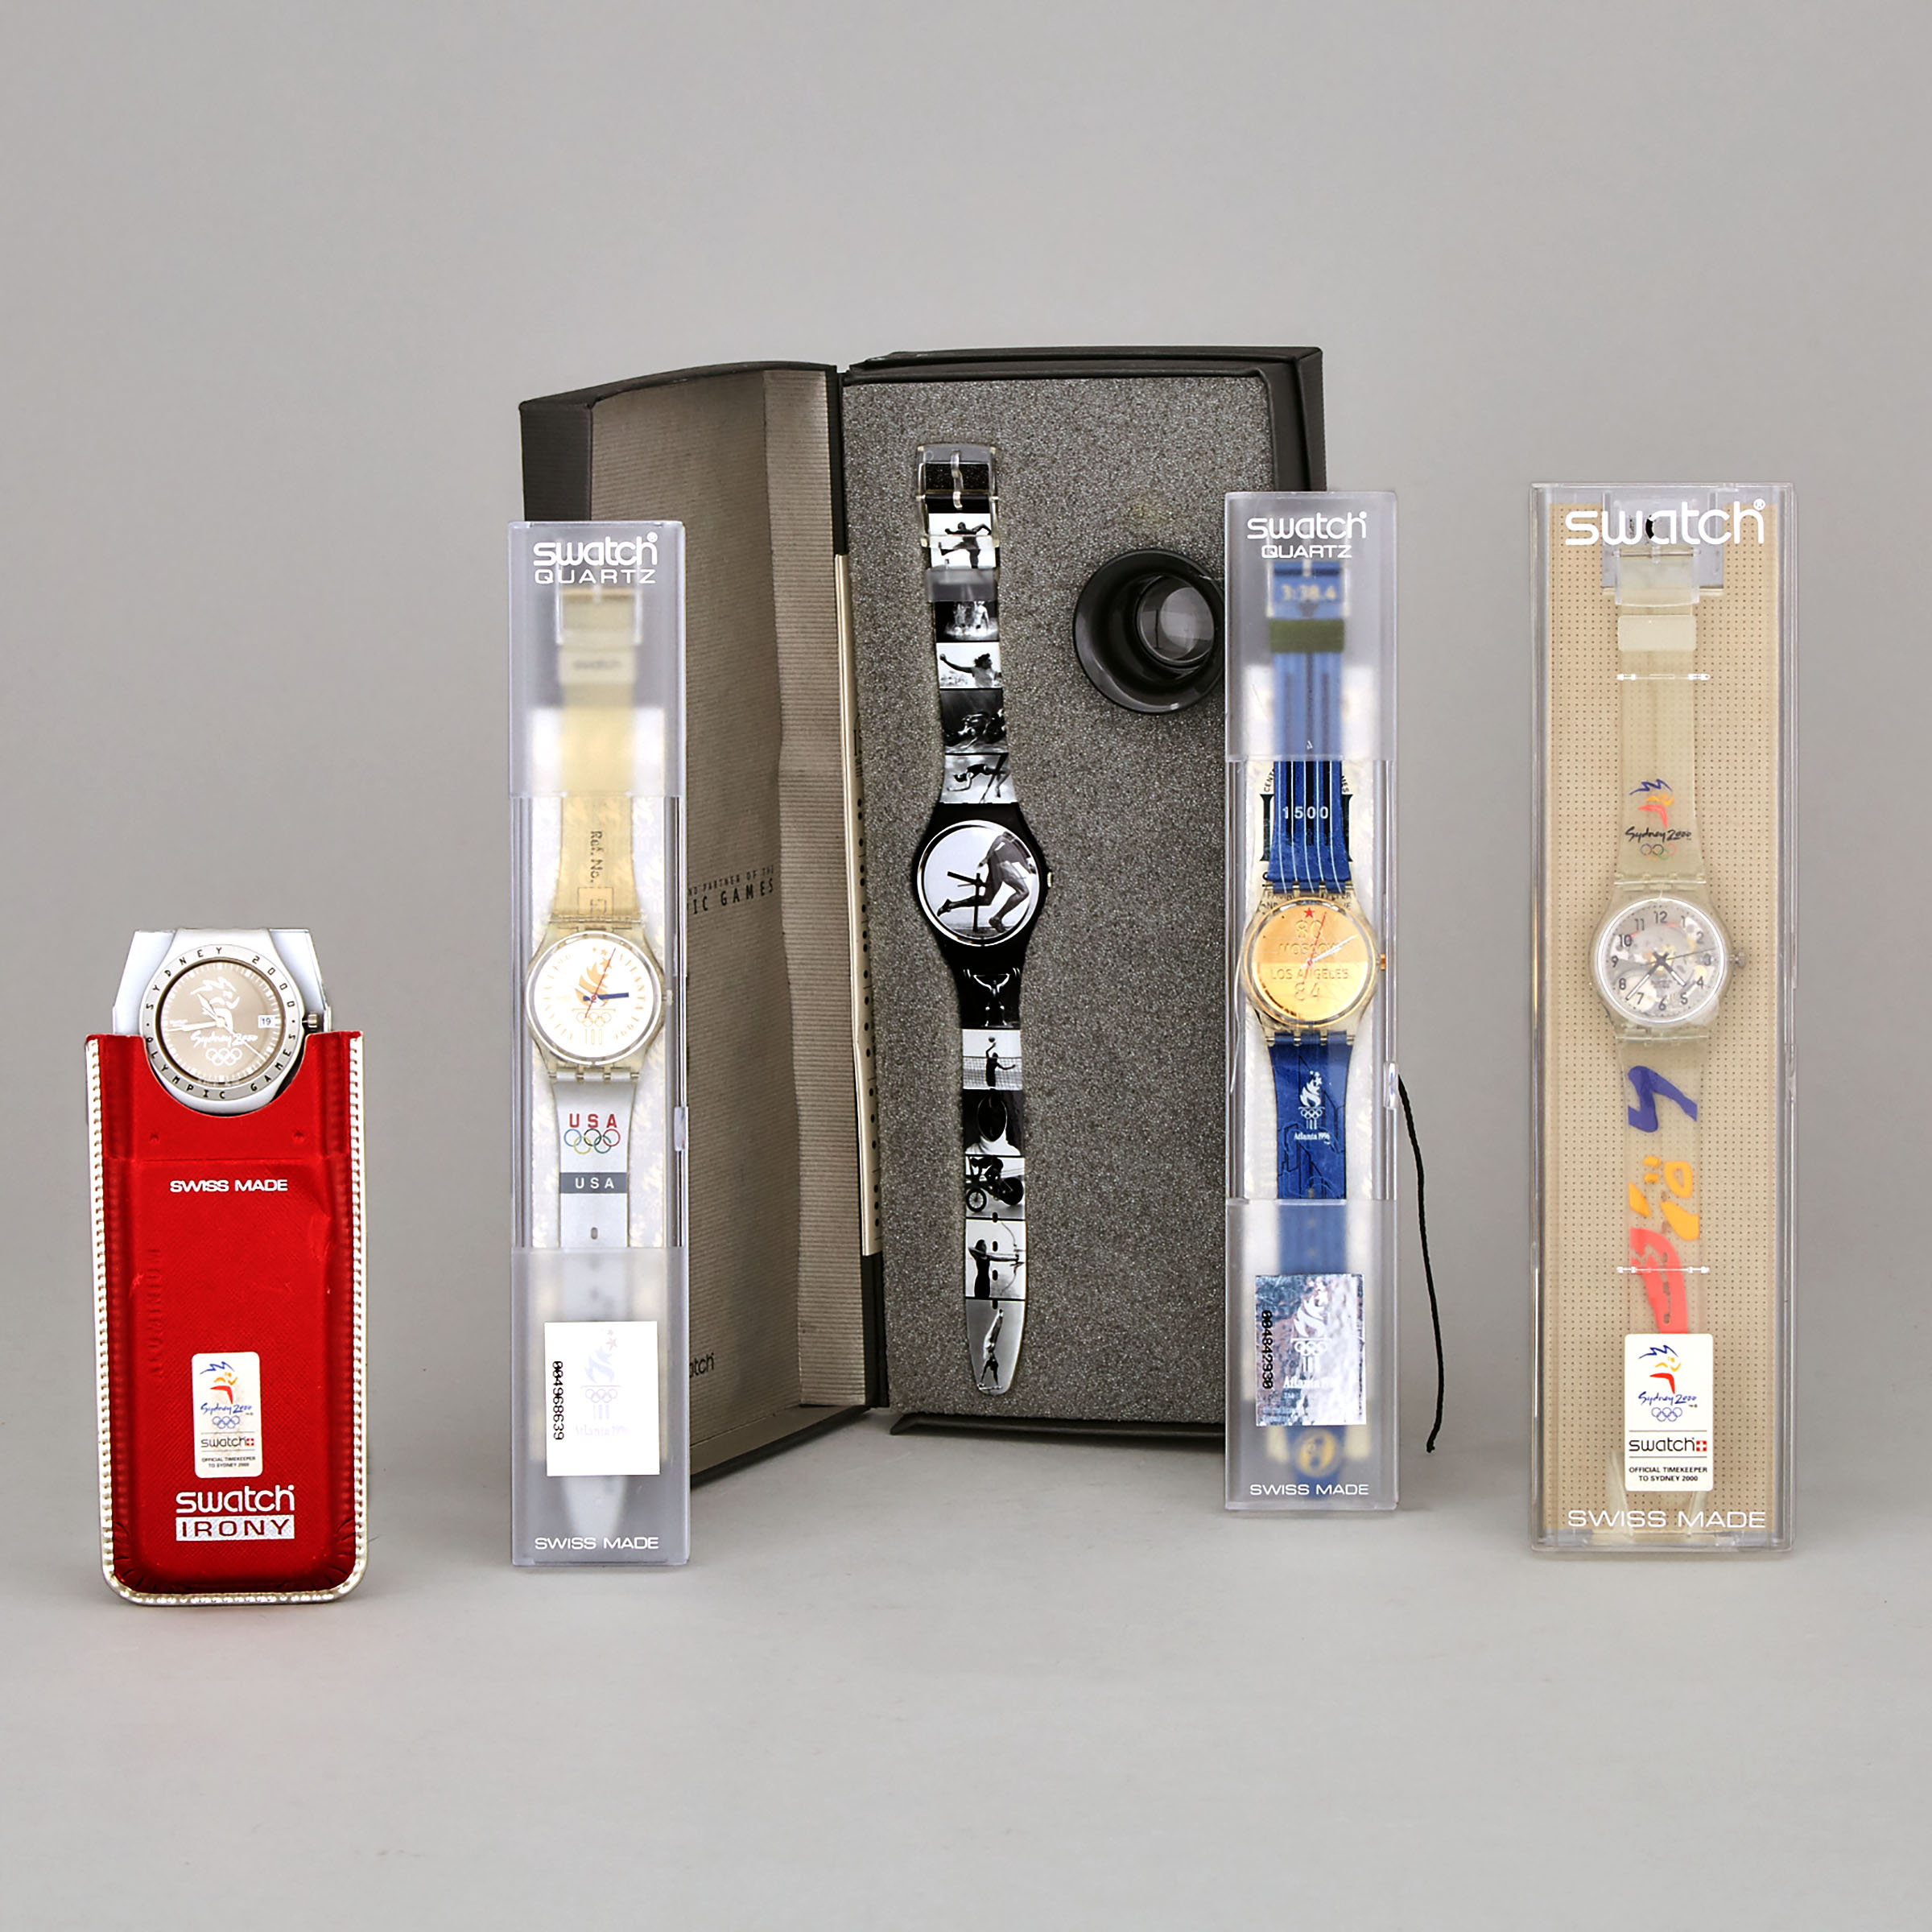 Five Olympic Games Related Swatch Watches, 1996-2000